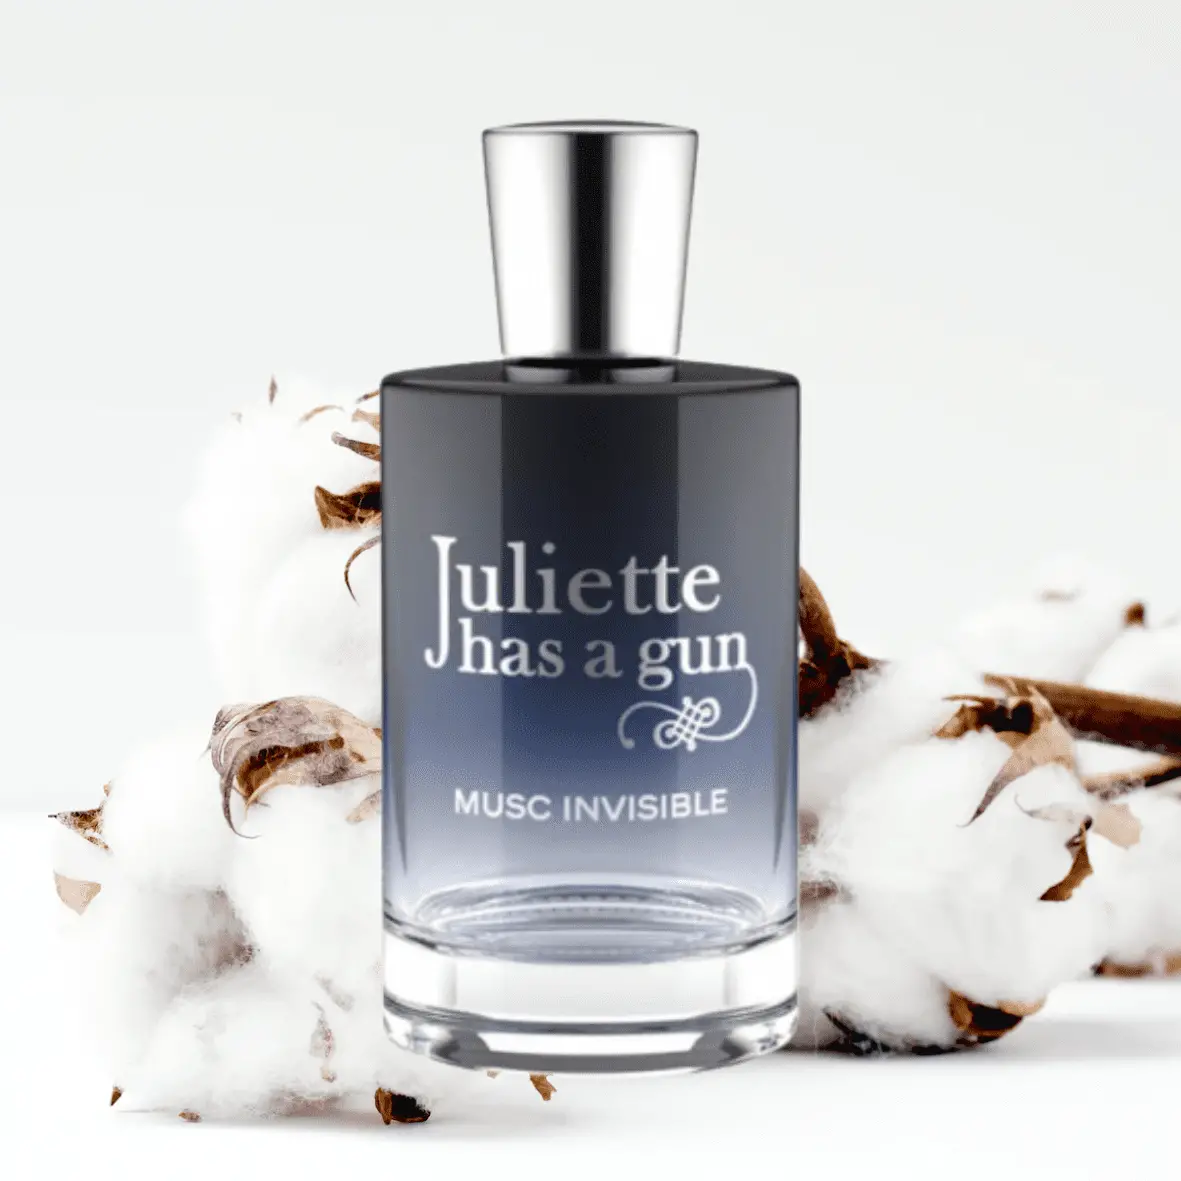 Juliette Has A Gun Musc Invisible
Perfumes That Smell like Fresh Laundry